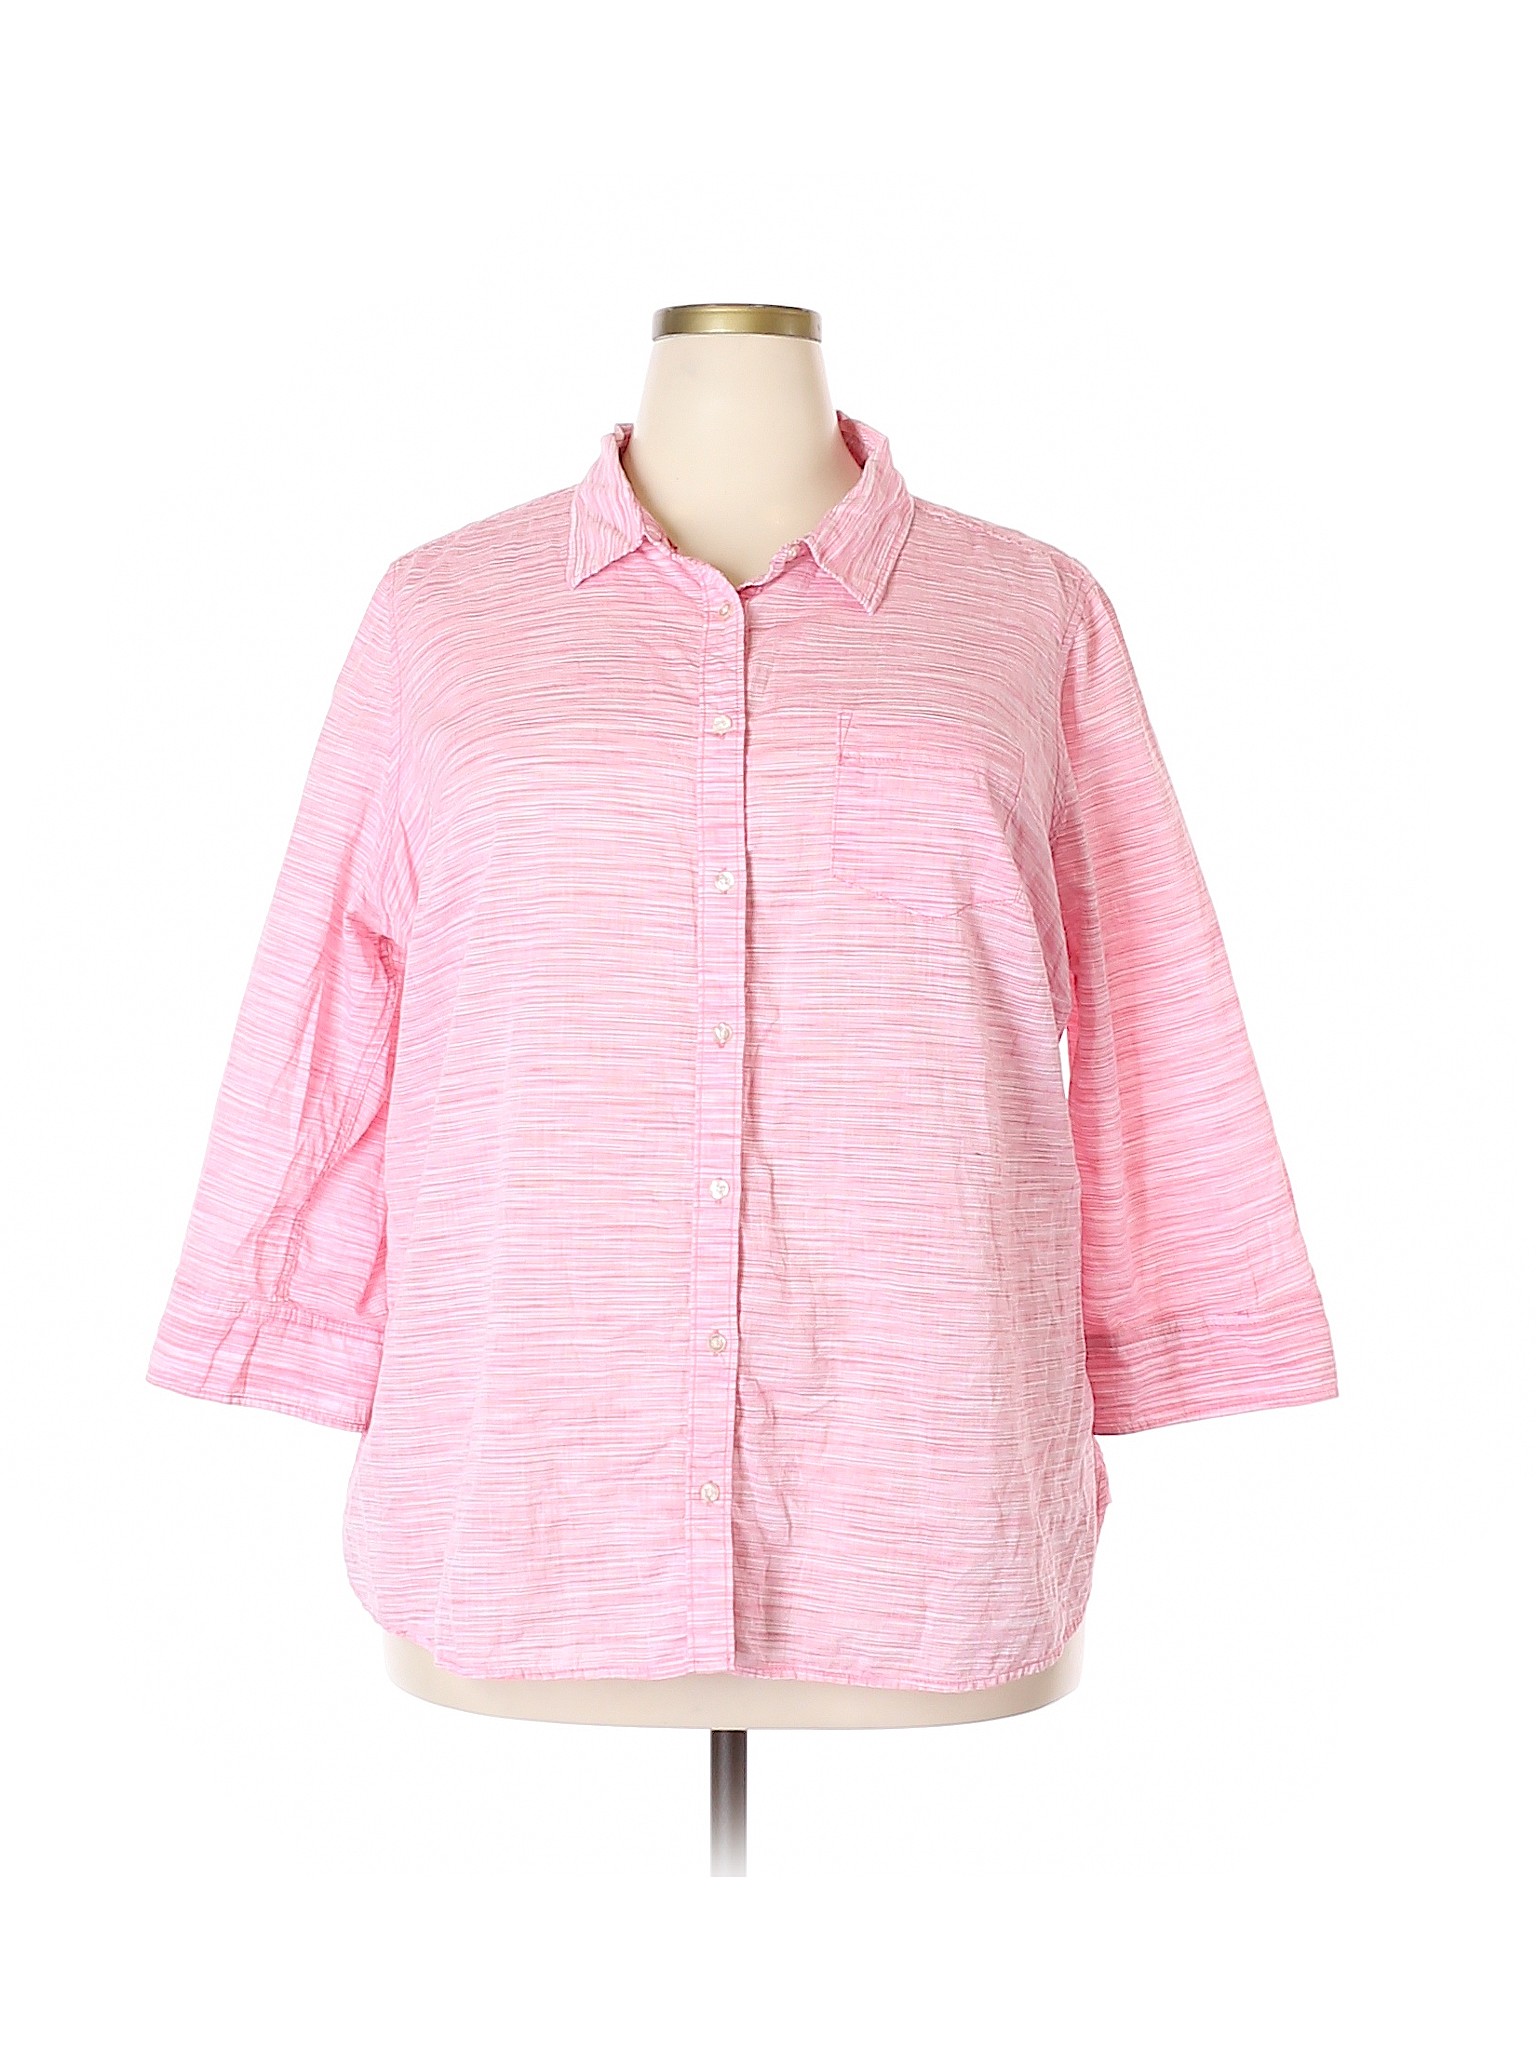 JCPenney 100% Cotton Solid Light Pink 3/4 Sleeve Button-Down Shirt Size ...